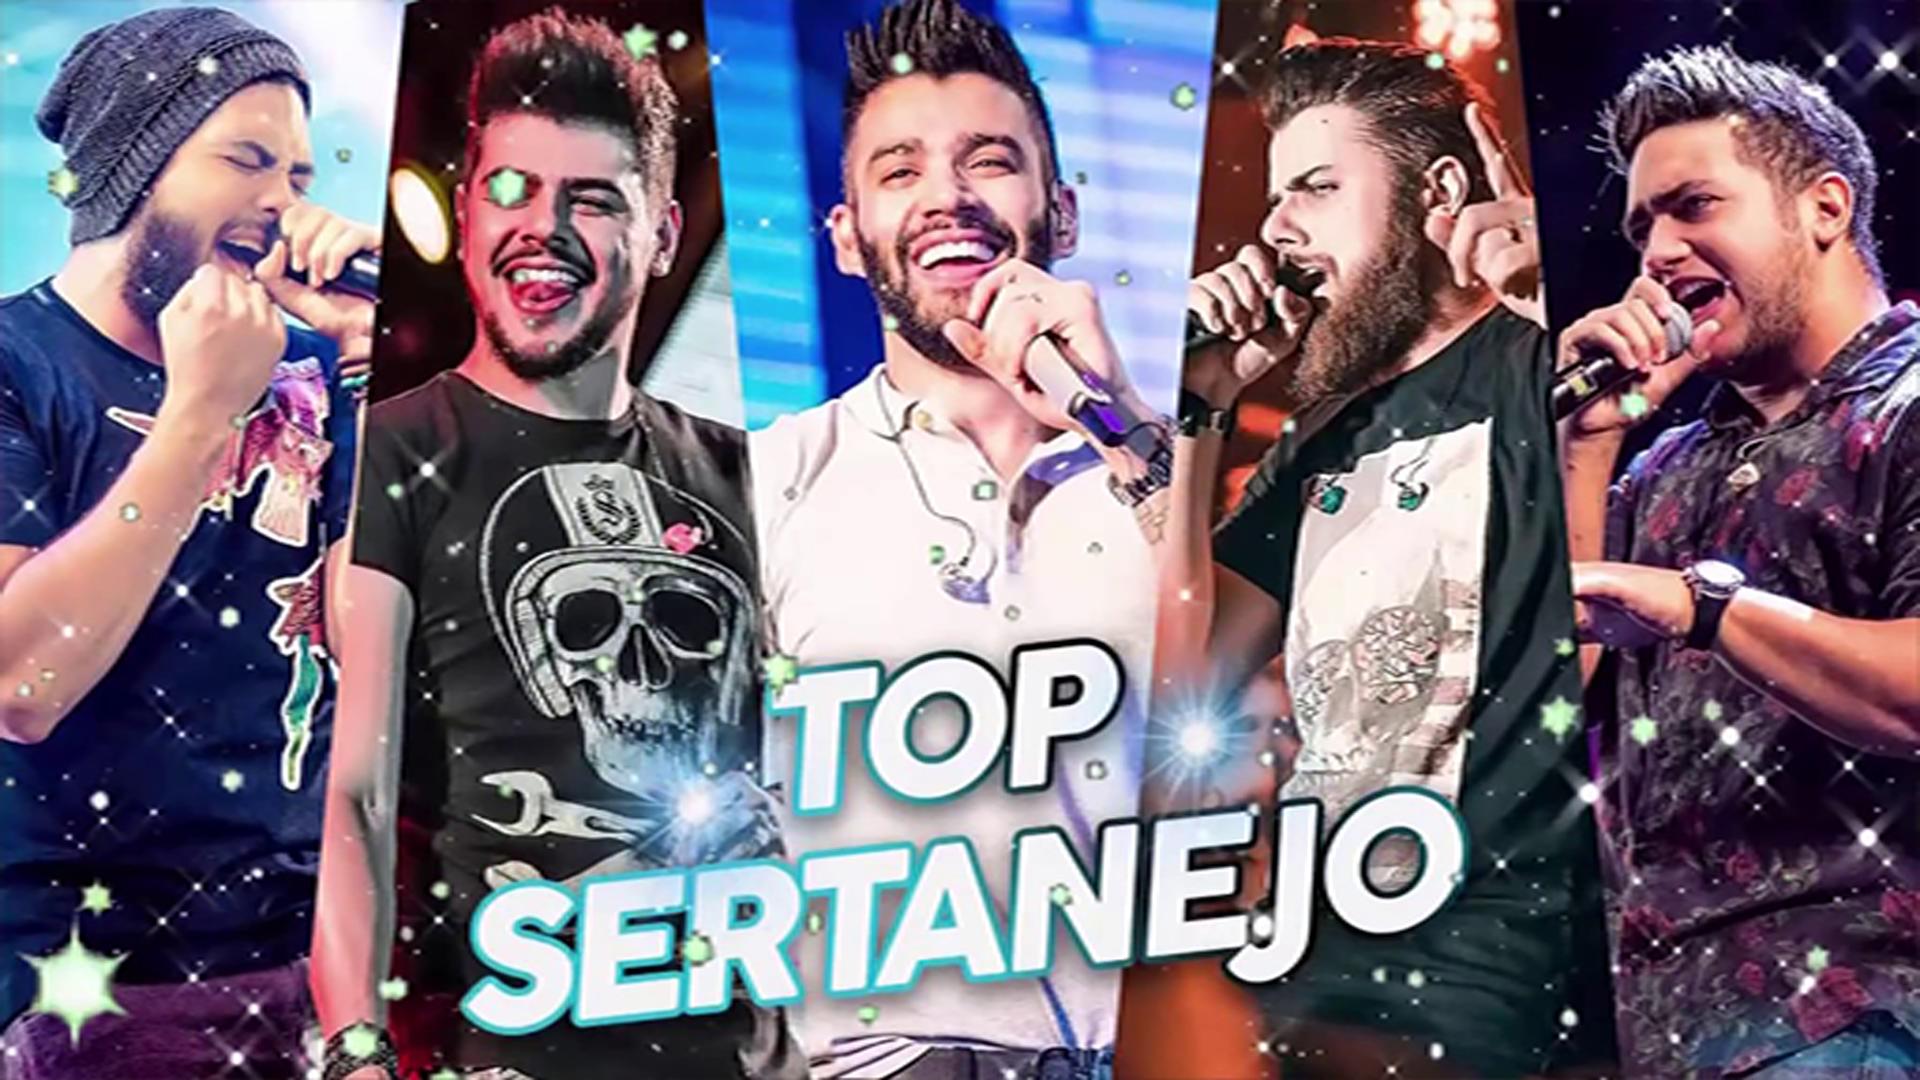 Sertanejas Top Musicas 2020 for Android - APK Download